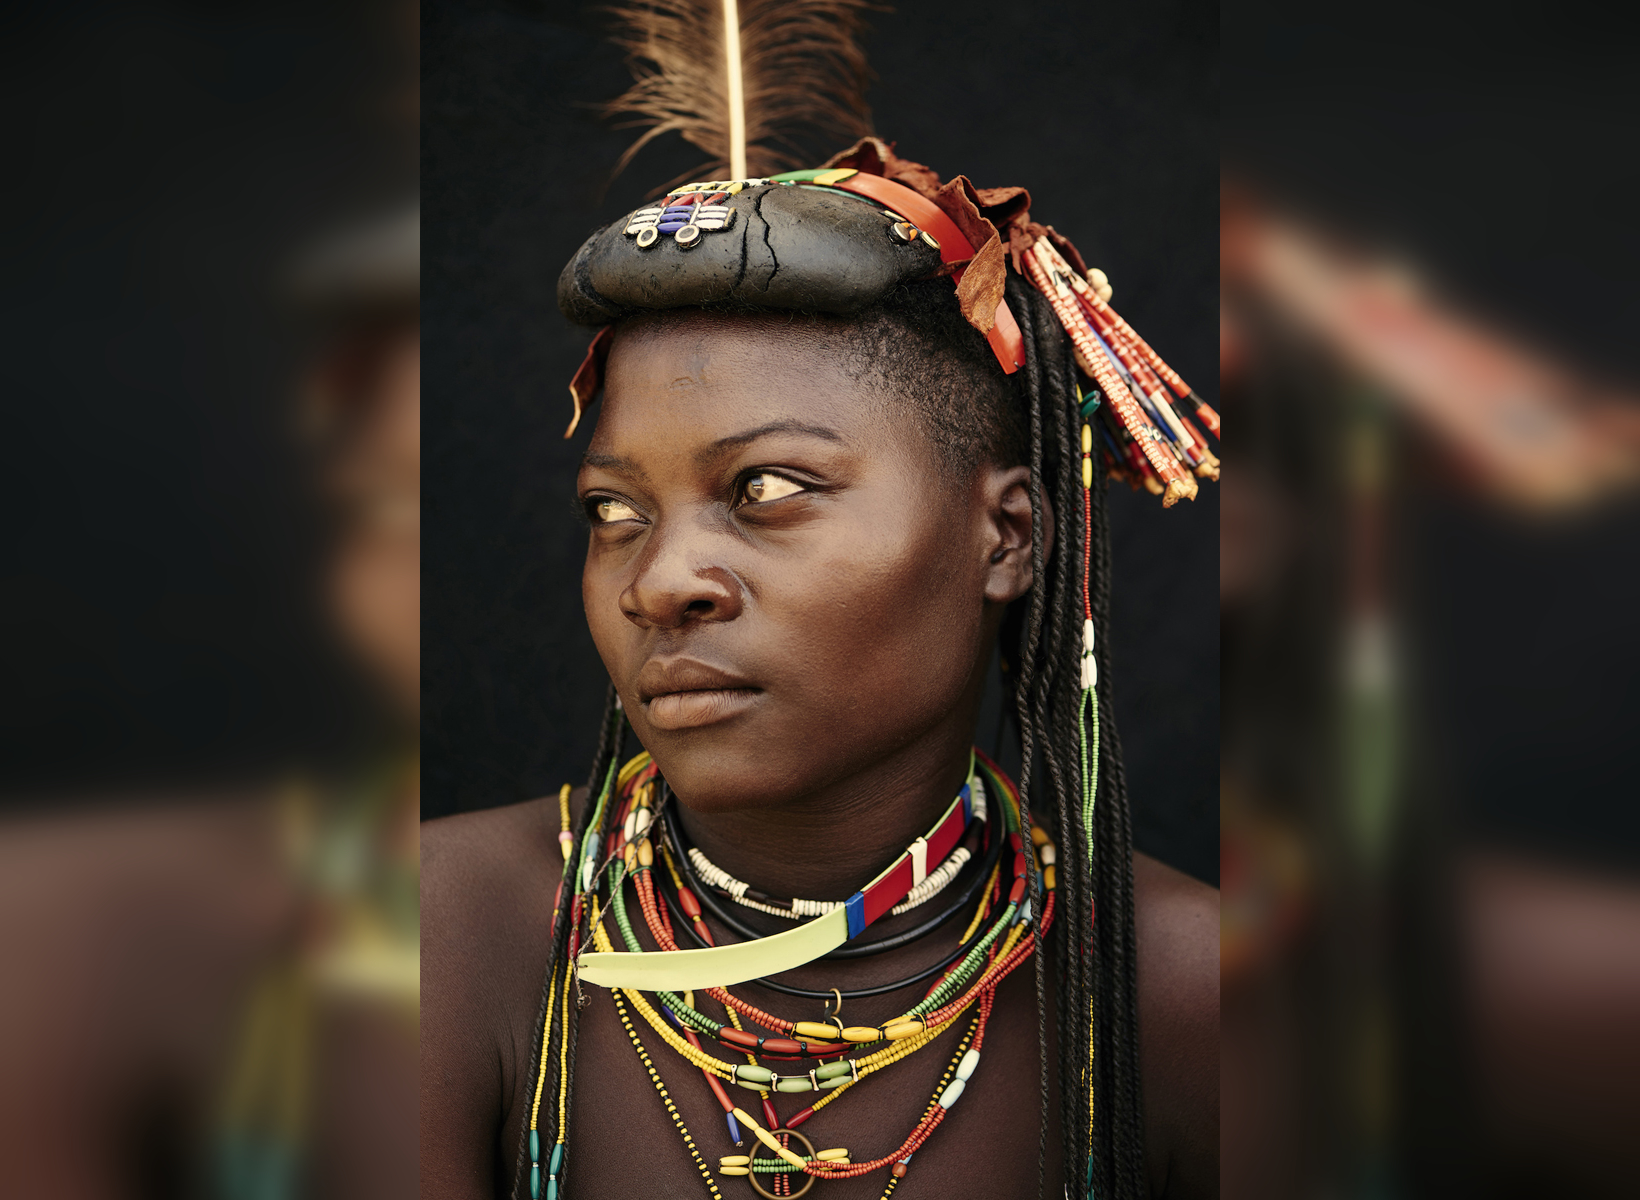 African Tribes in Focus: 25 Vibrant and Authentic Photographs